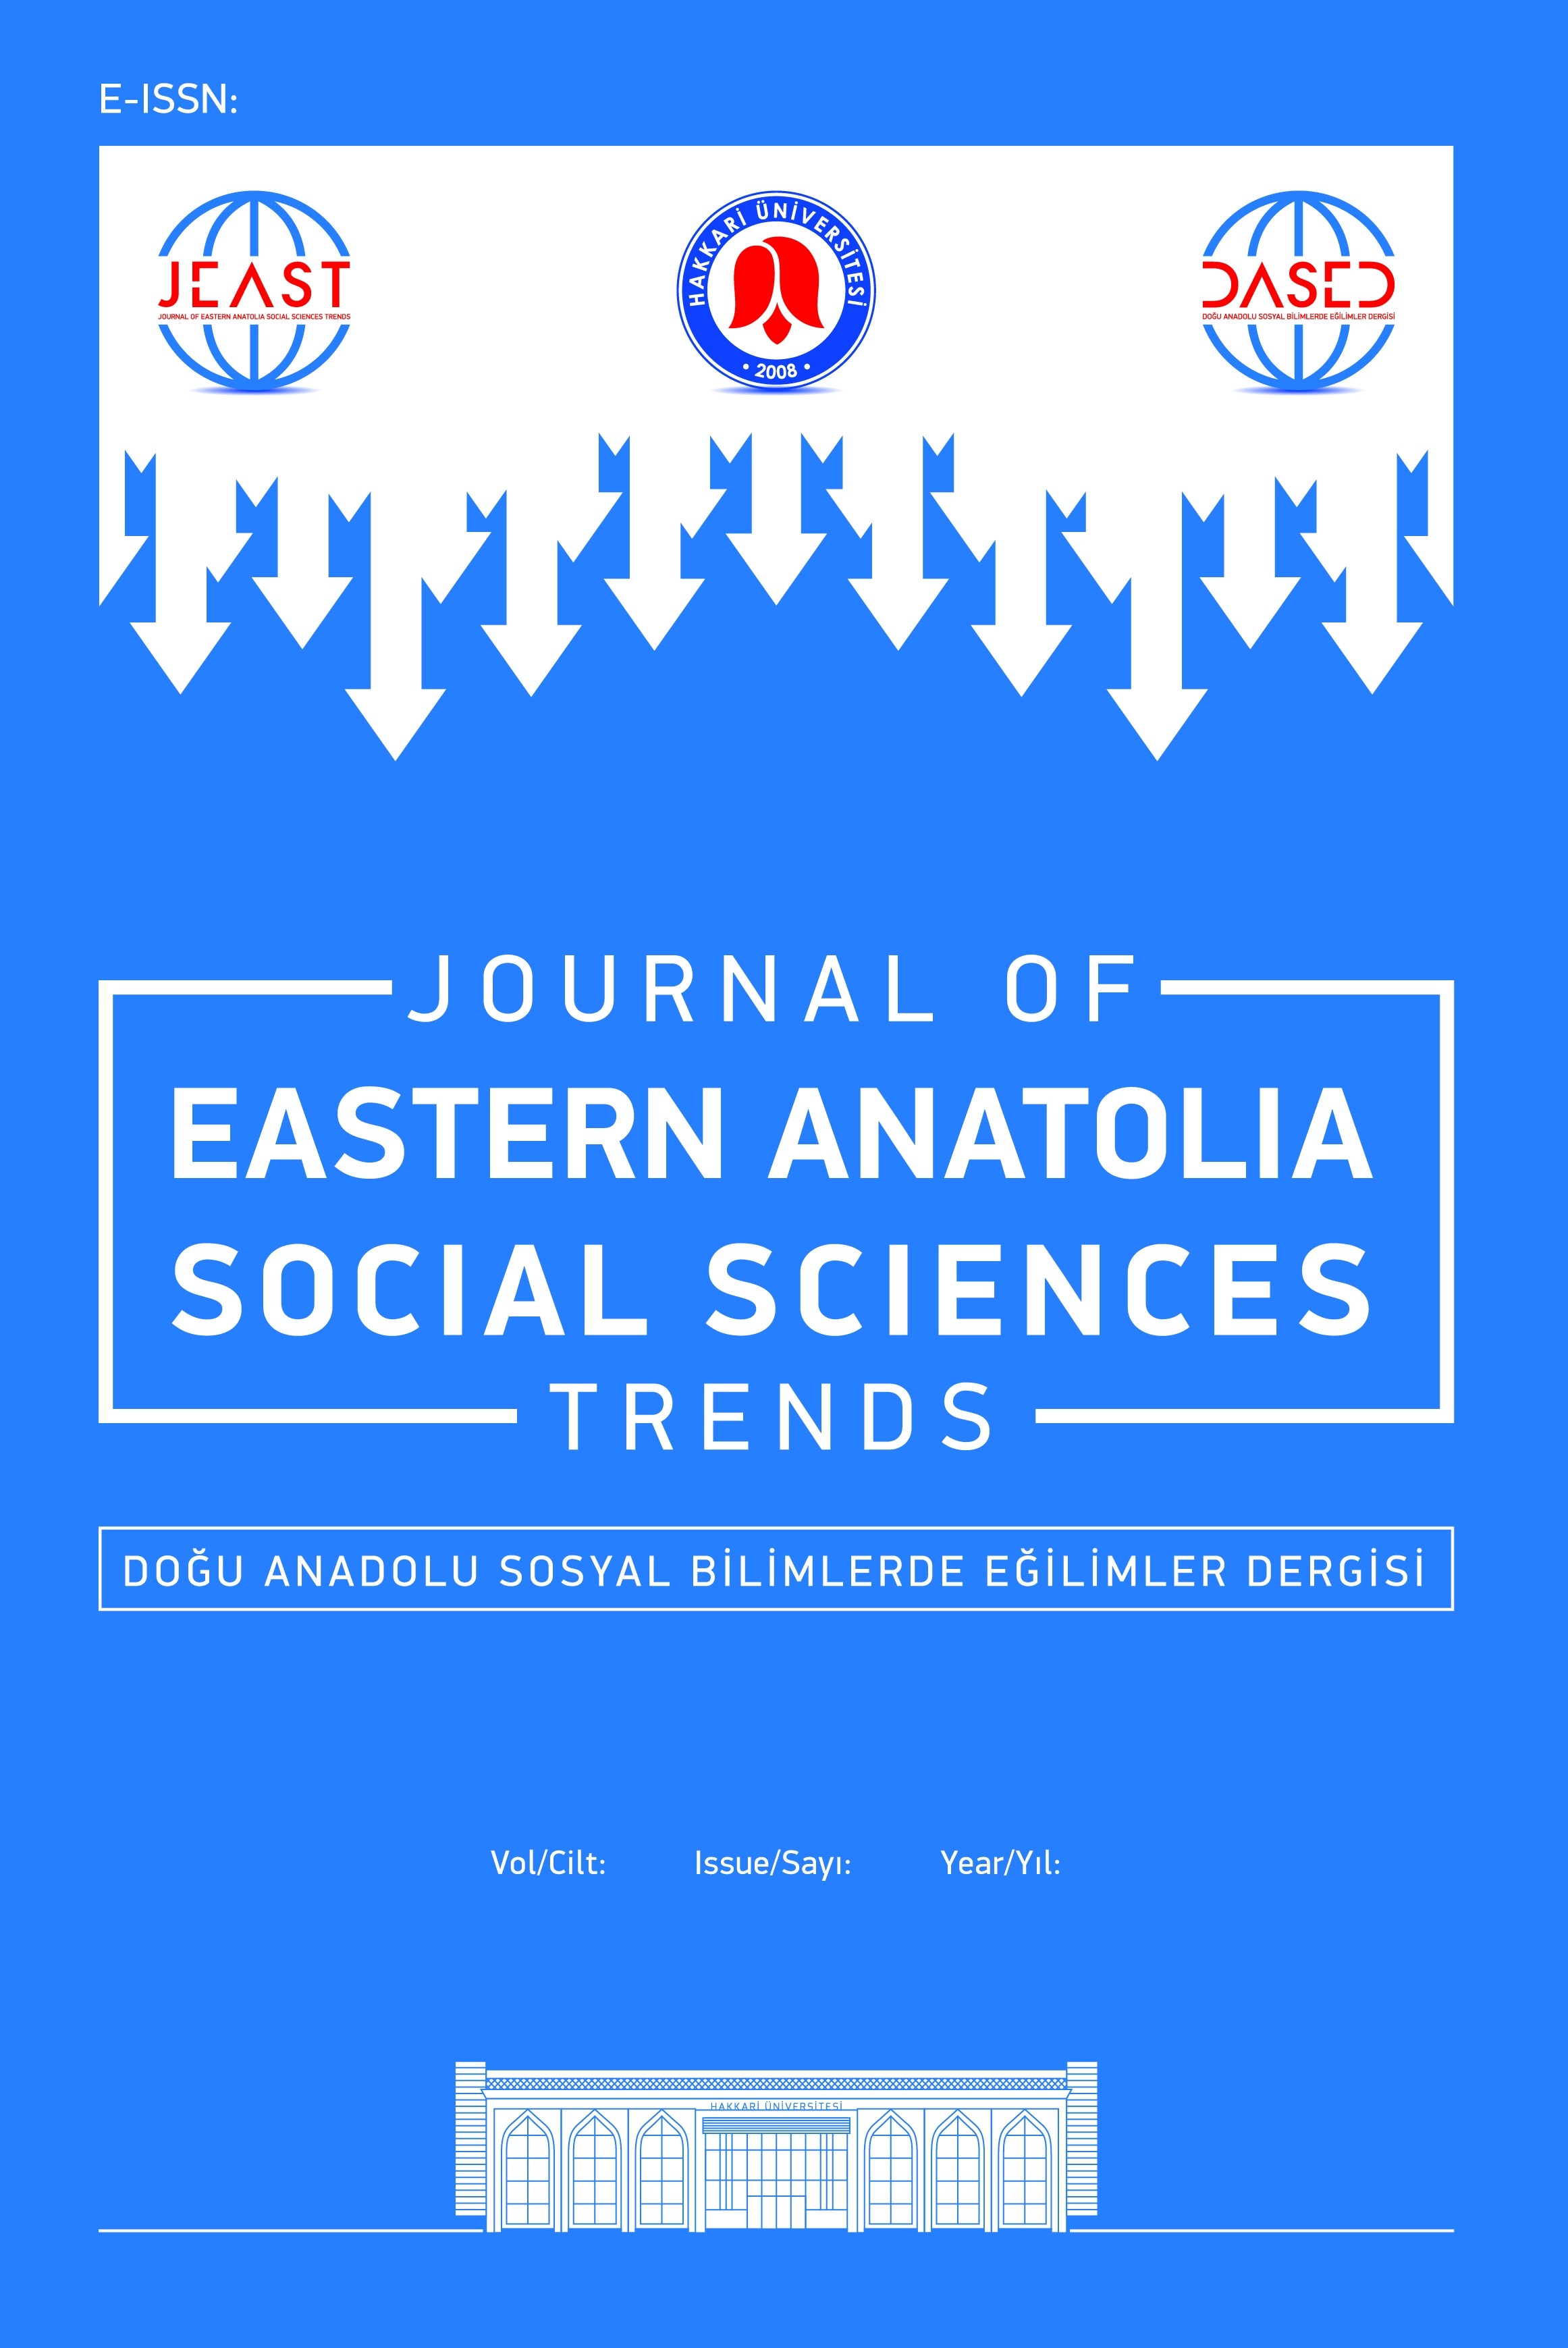 Journal of Eastern Anatolia Social Sciences Trend